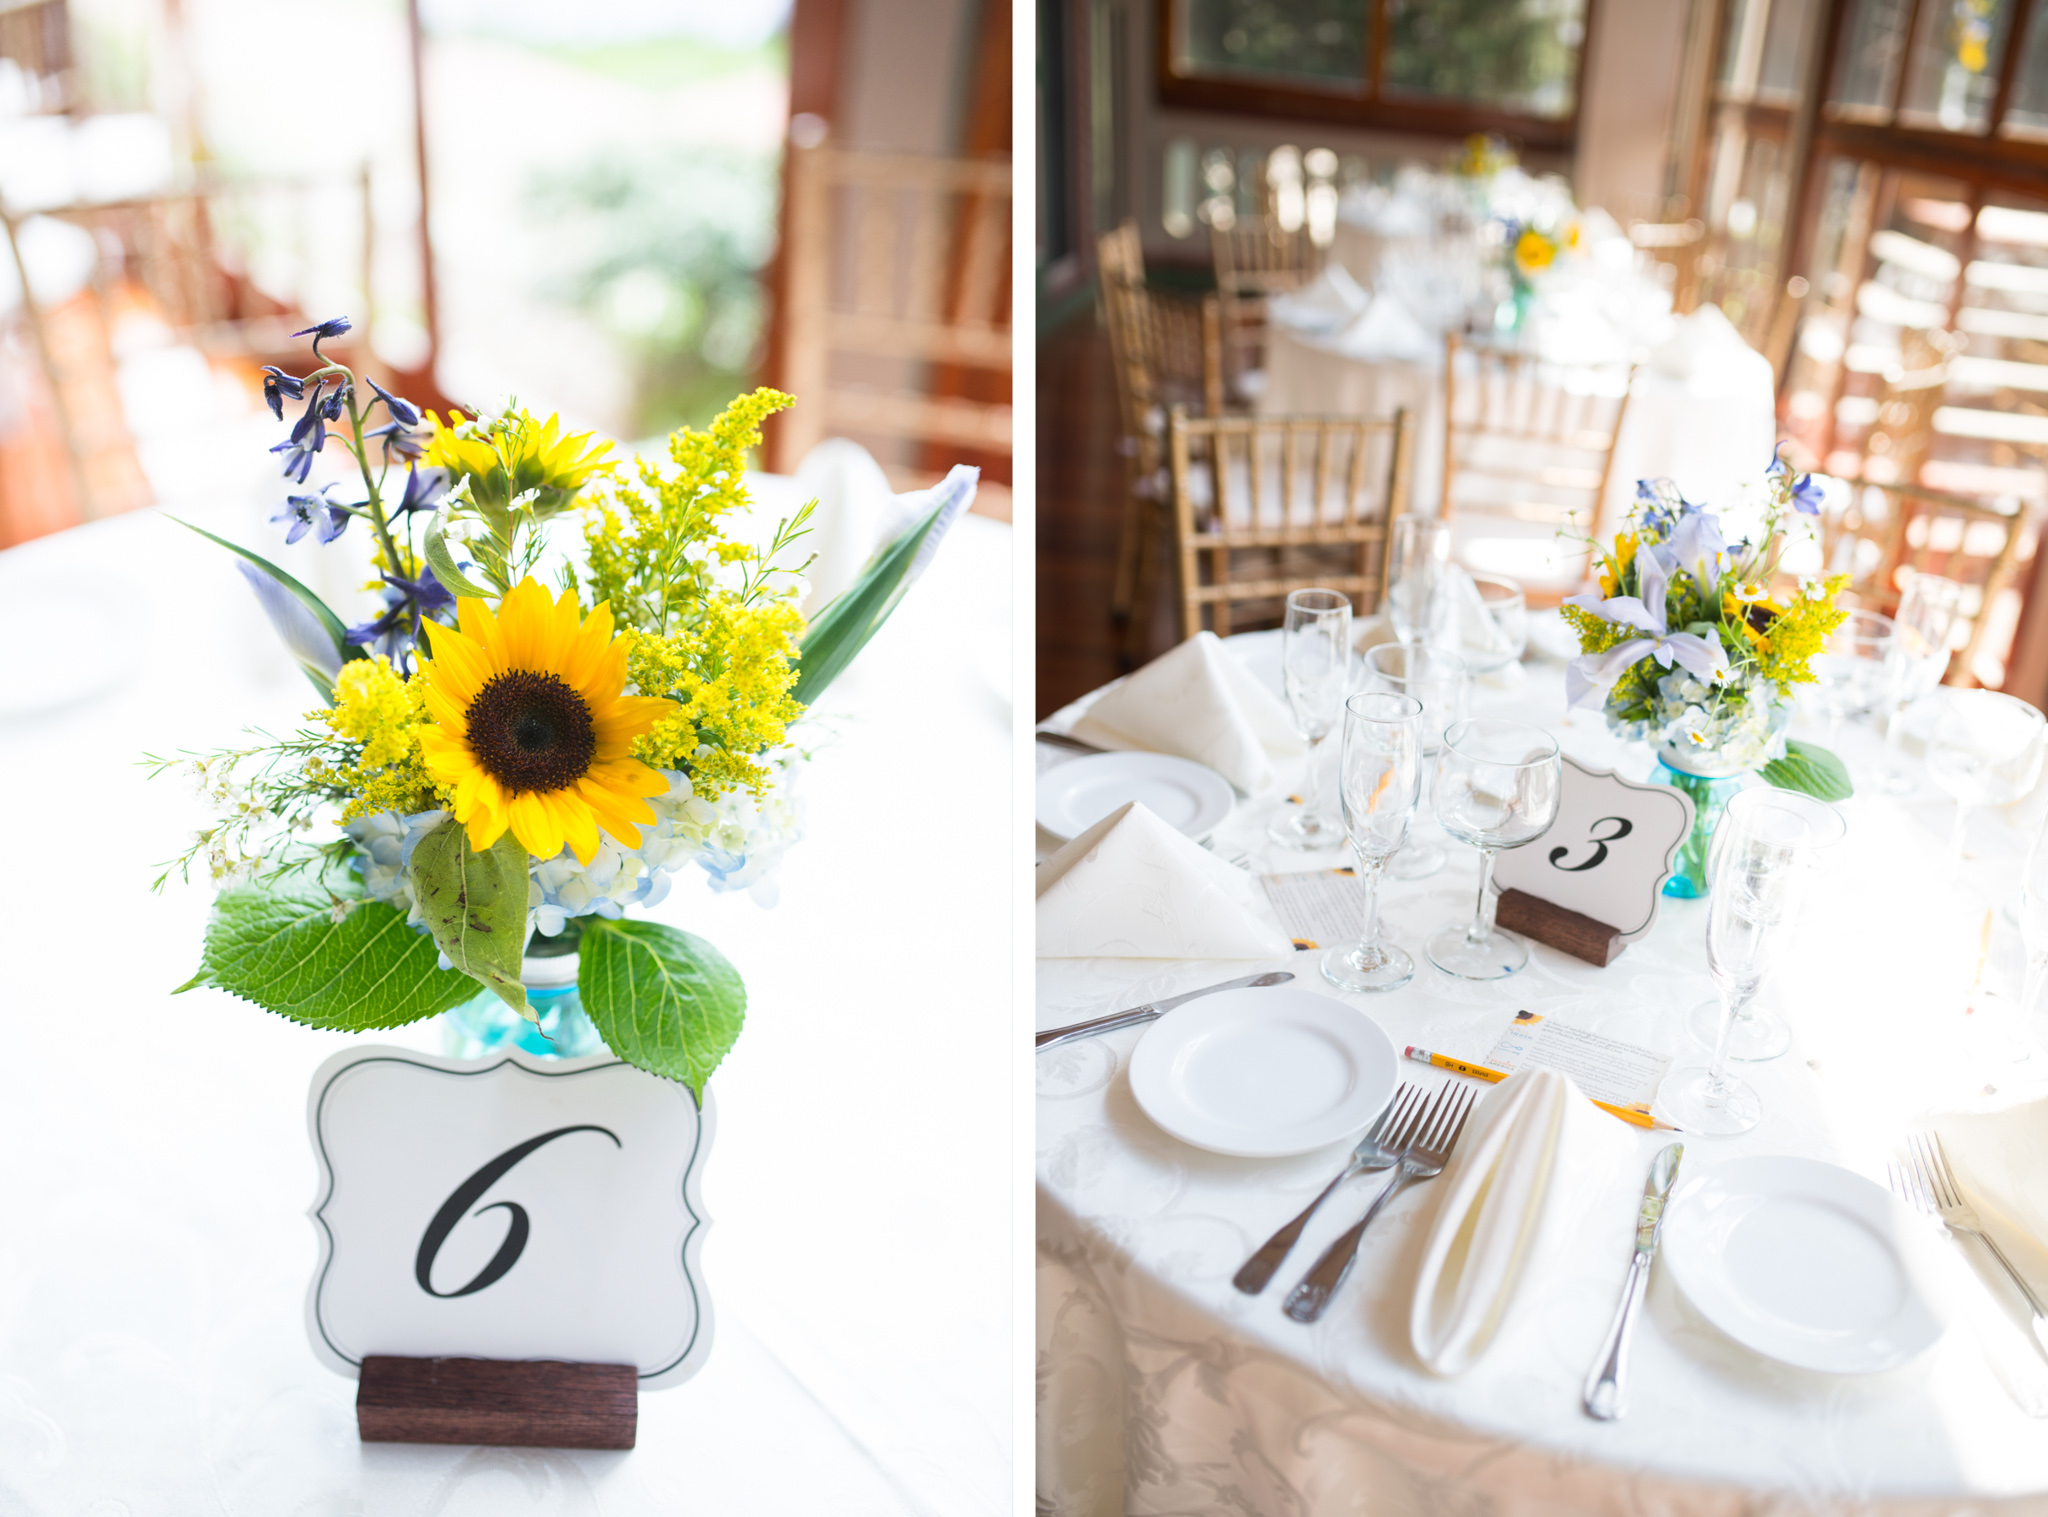 Mike+Alyssa - Cape May Southern Mansion Wedding - Sunflower Centerpieces photo